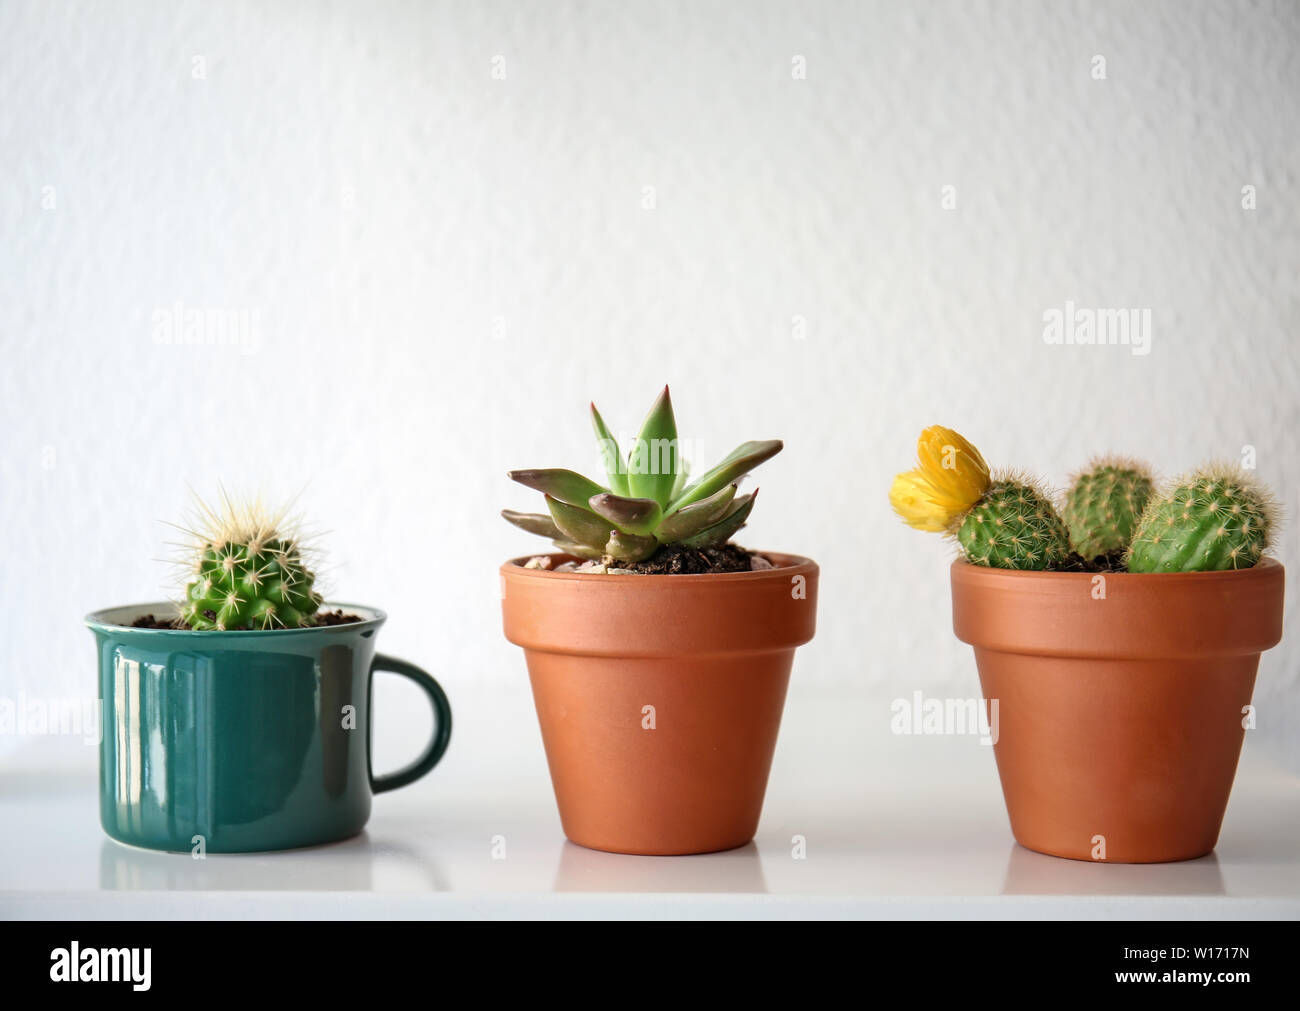 Different succulents in pots on table against white background Stock Photo